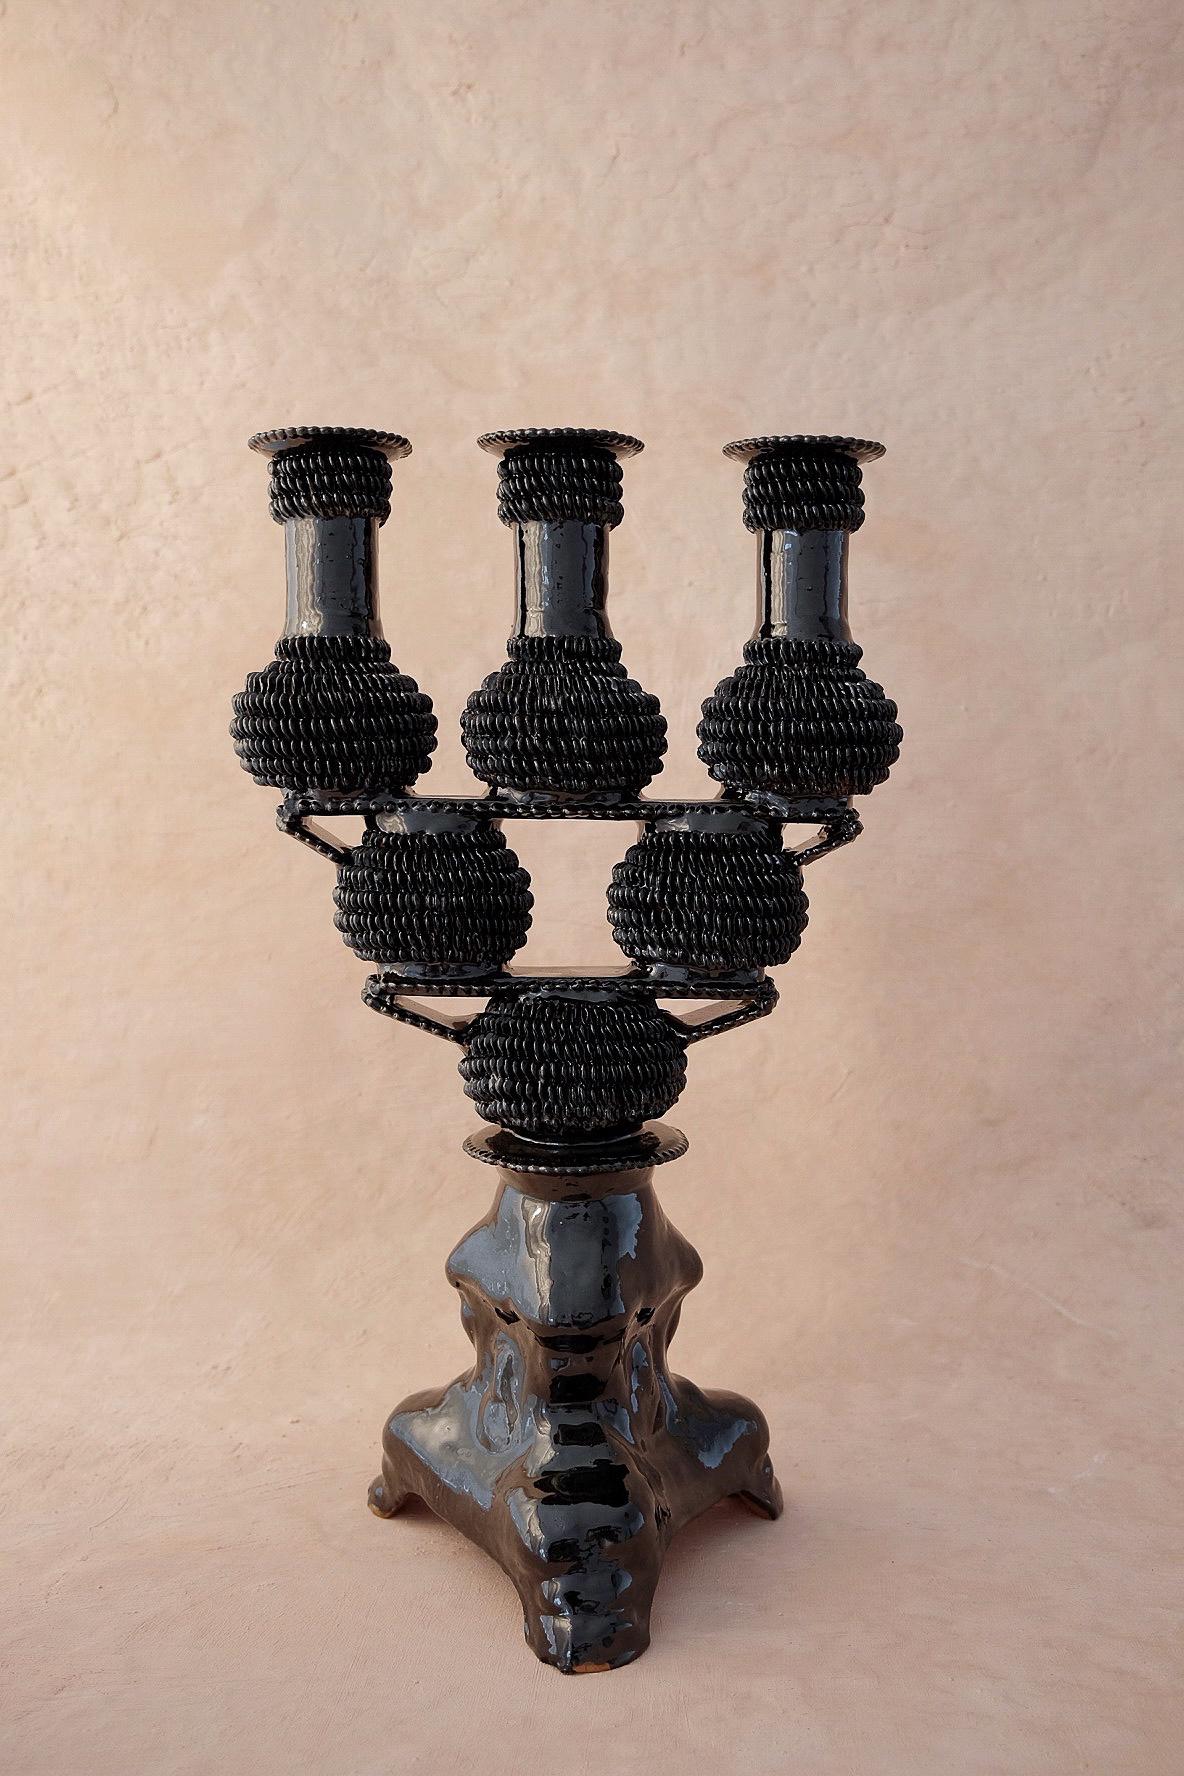 Tres Luces candleholder by Onora
Dimensions: W 28 x H 45.7 cm
Materials: Clay, Glazed pottery

Hand sculpted clay, covered with a mineral based slip and burnished using a quartz stone. The “Circo Collection” is a reproduction of Herón Martínez